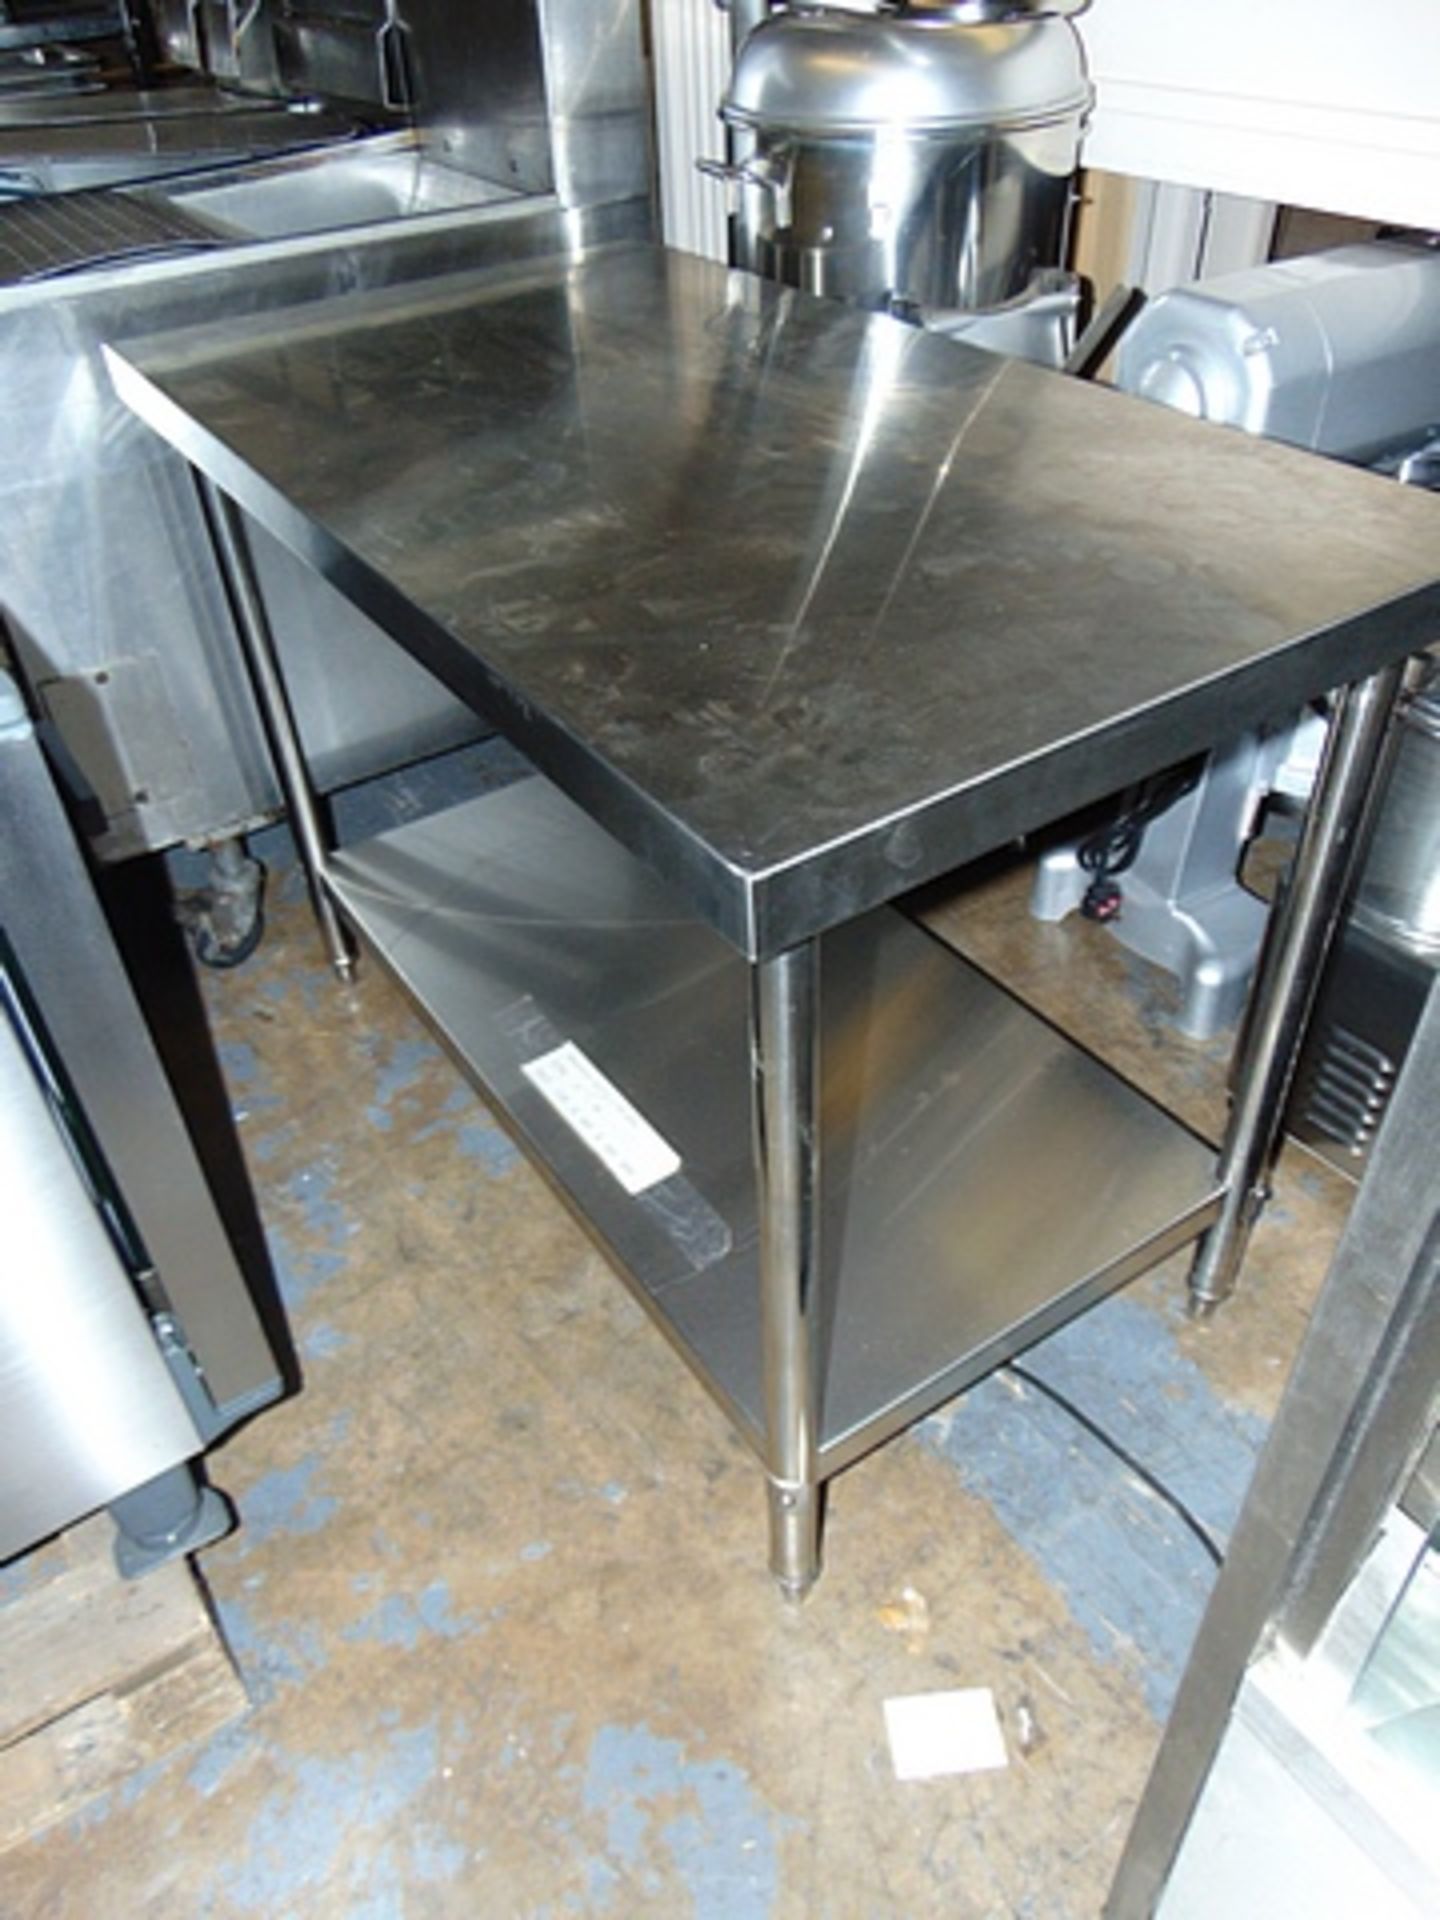 Brand New stainless steel commercial heavy duty preparation table 1520mm x 820mm thick top grade 304